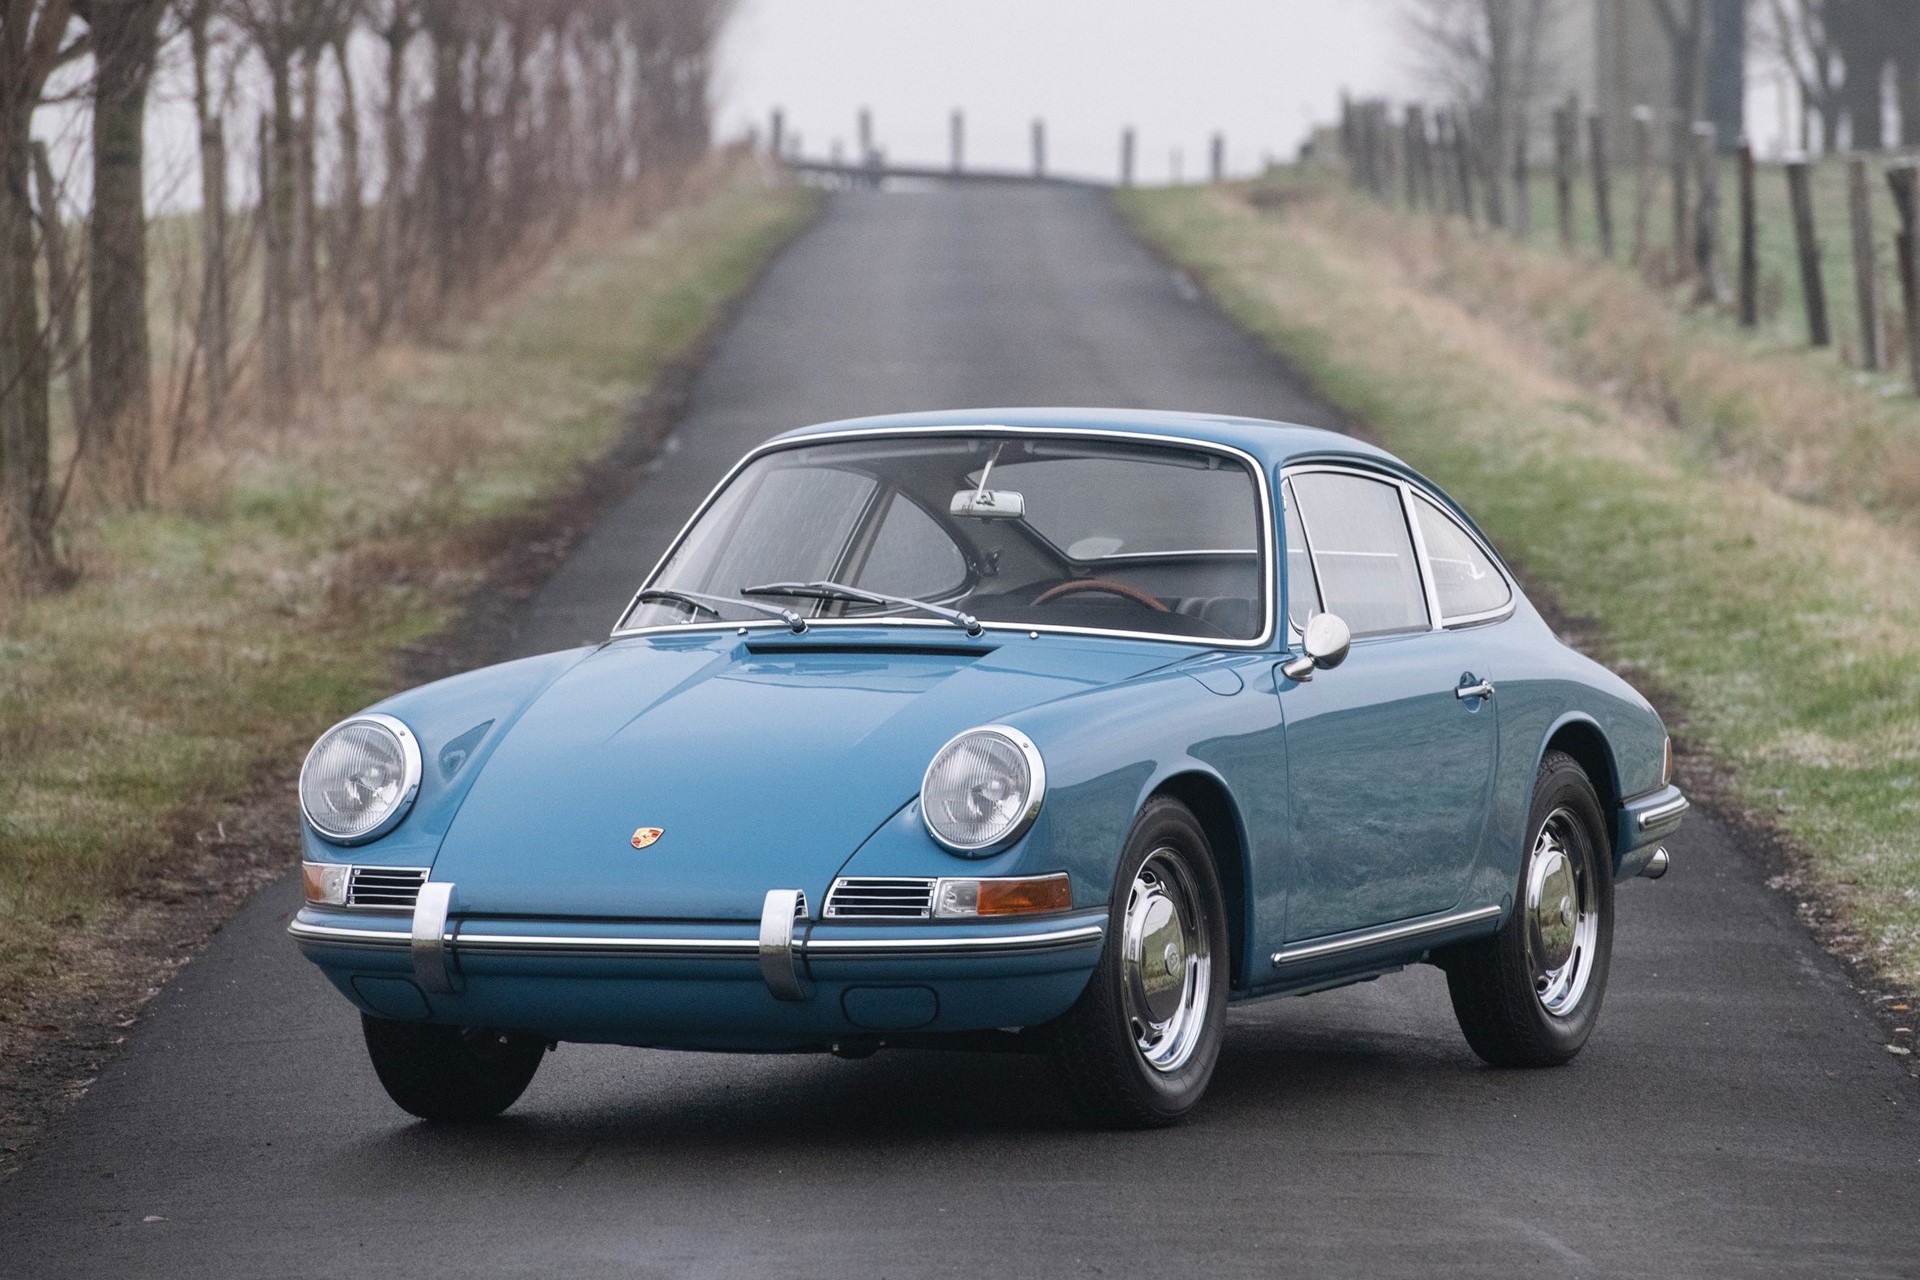 Front angled view of a blue 1964 Porsche 911